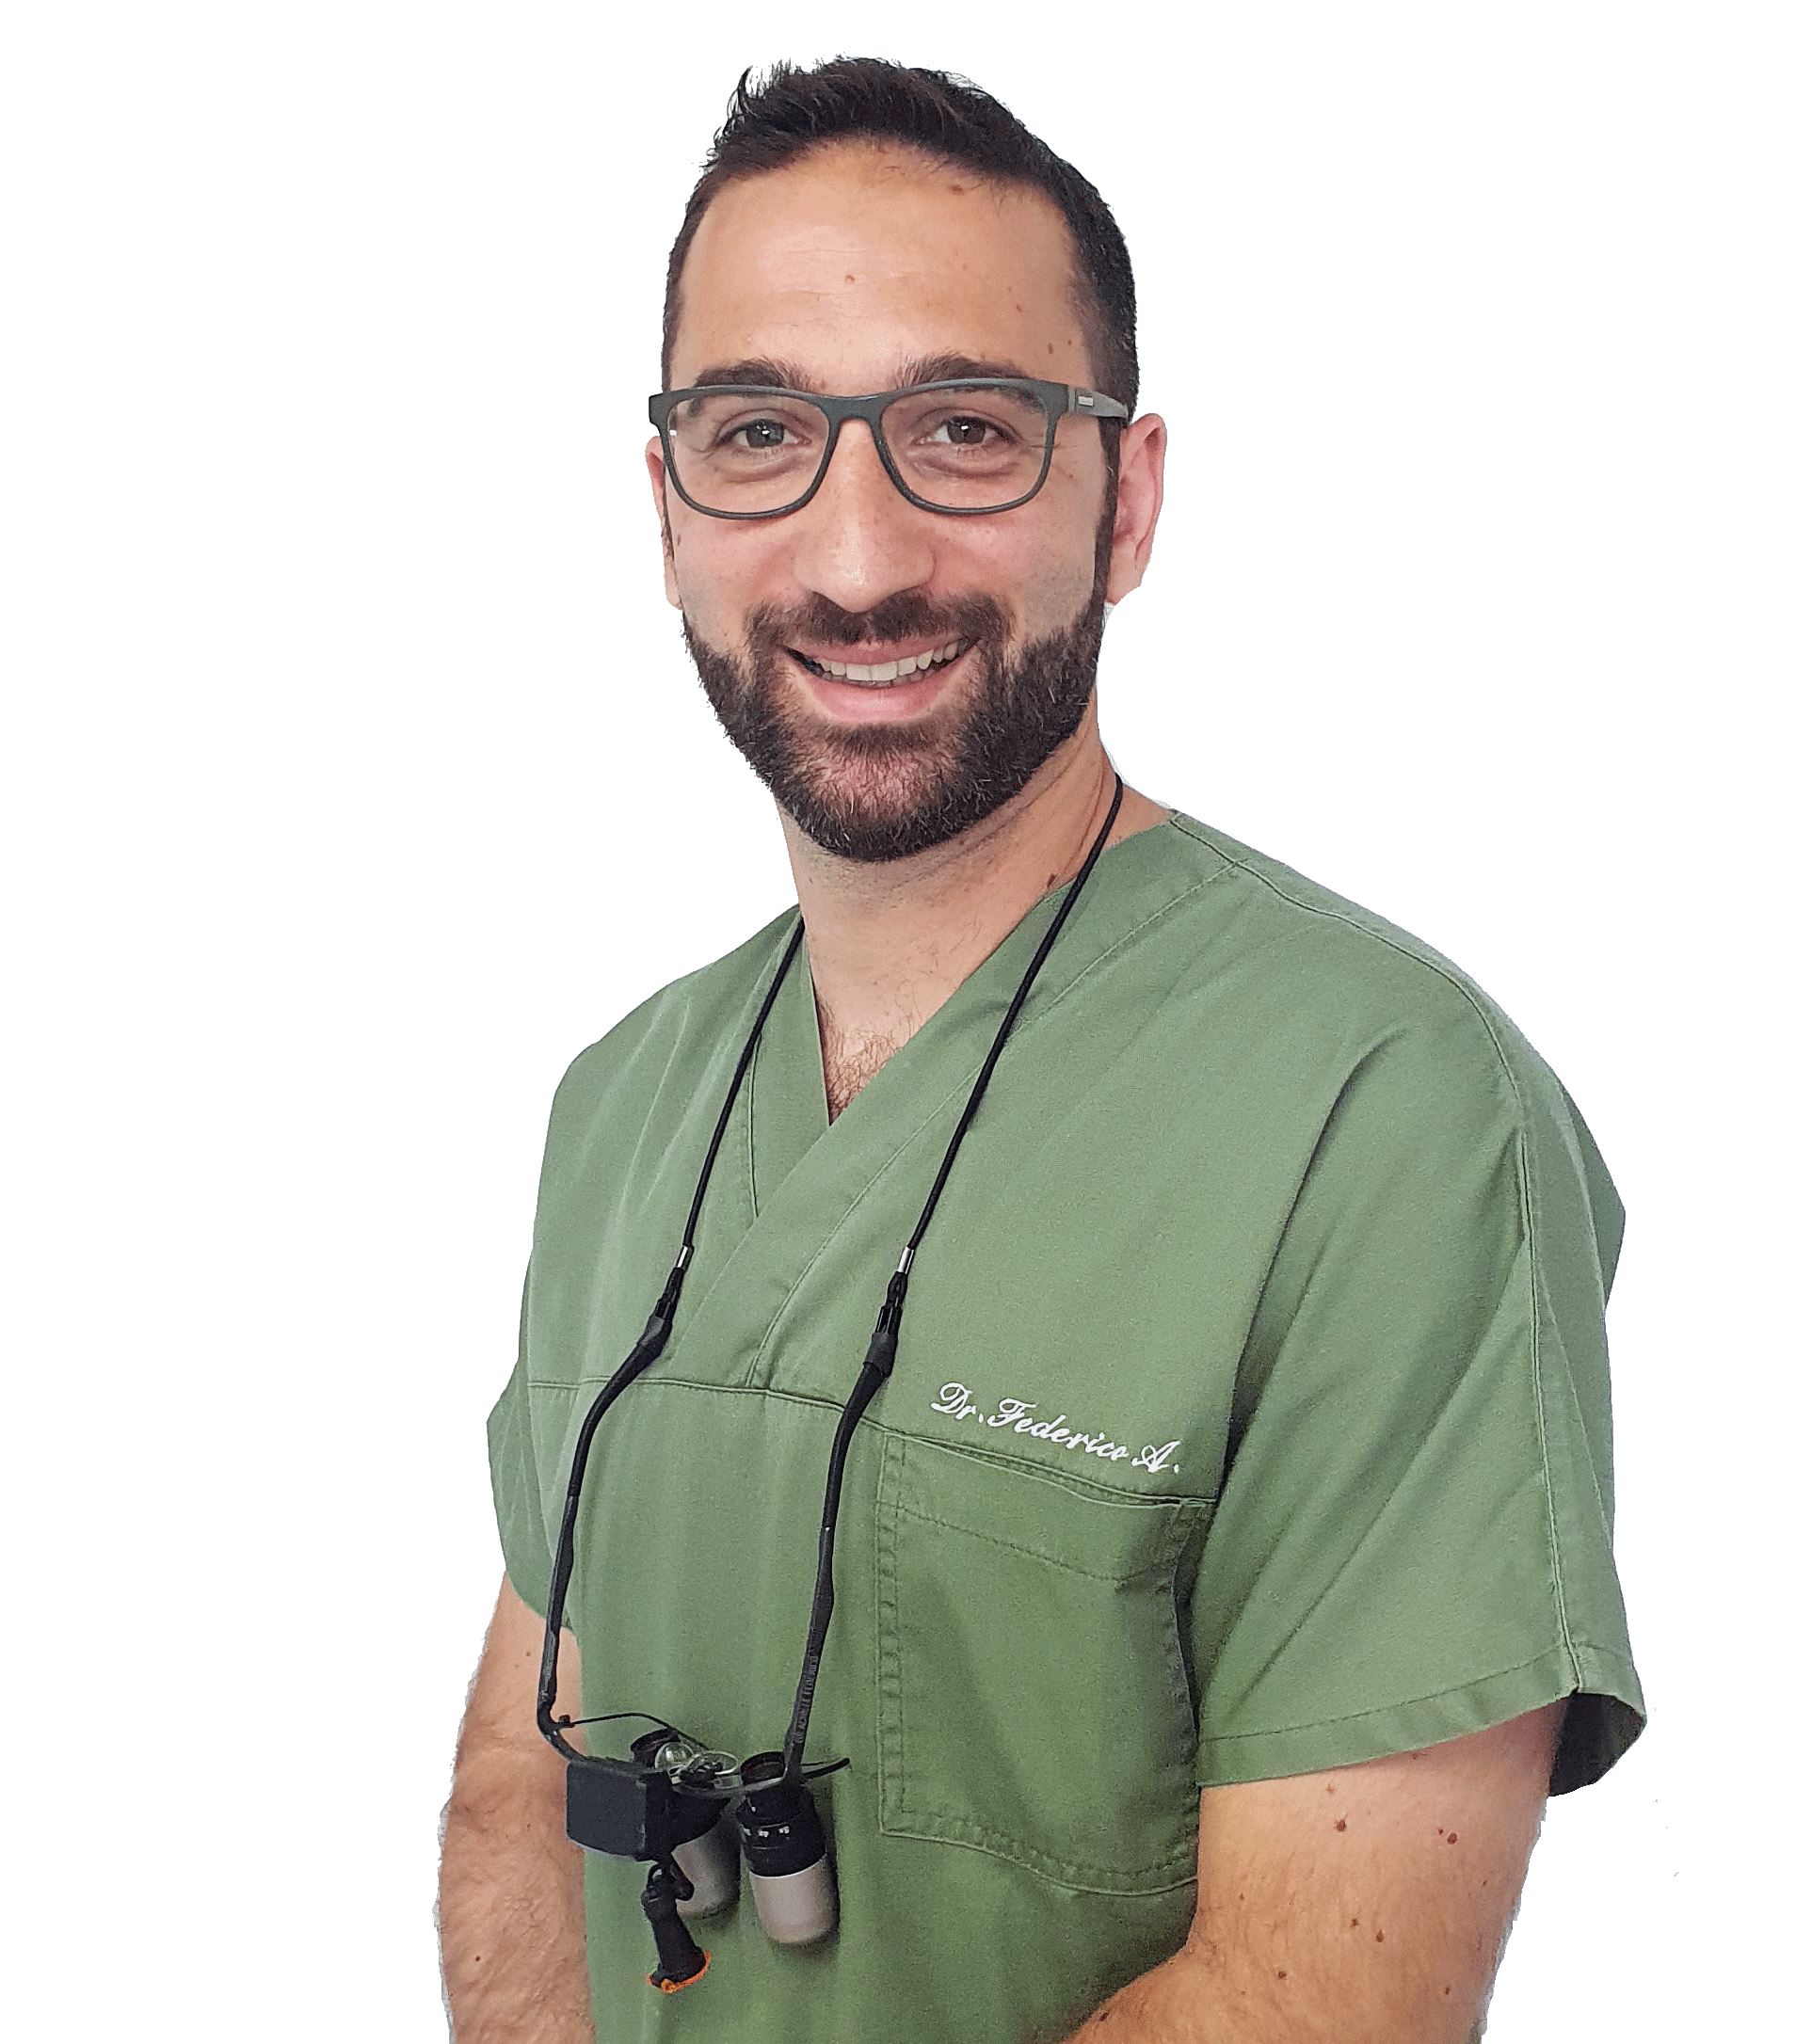 https://www.studiodentisticofederico.it/wp-content/uploads/2021/06/achille-federico-studio-dentistico-federico-trasparente.png